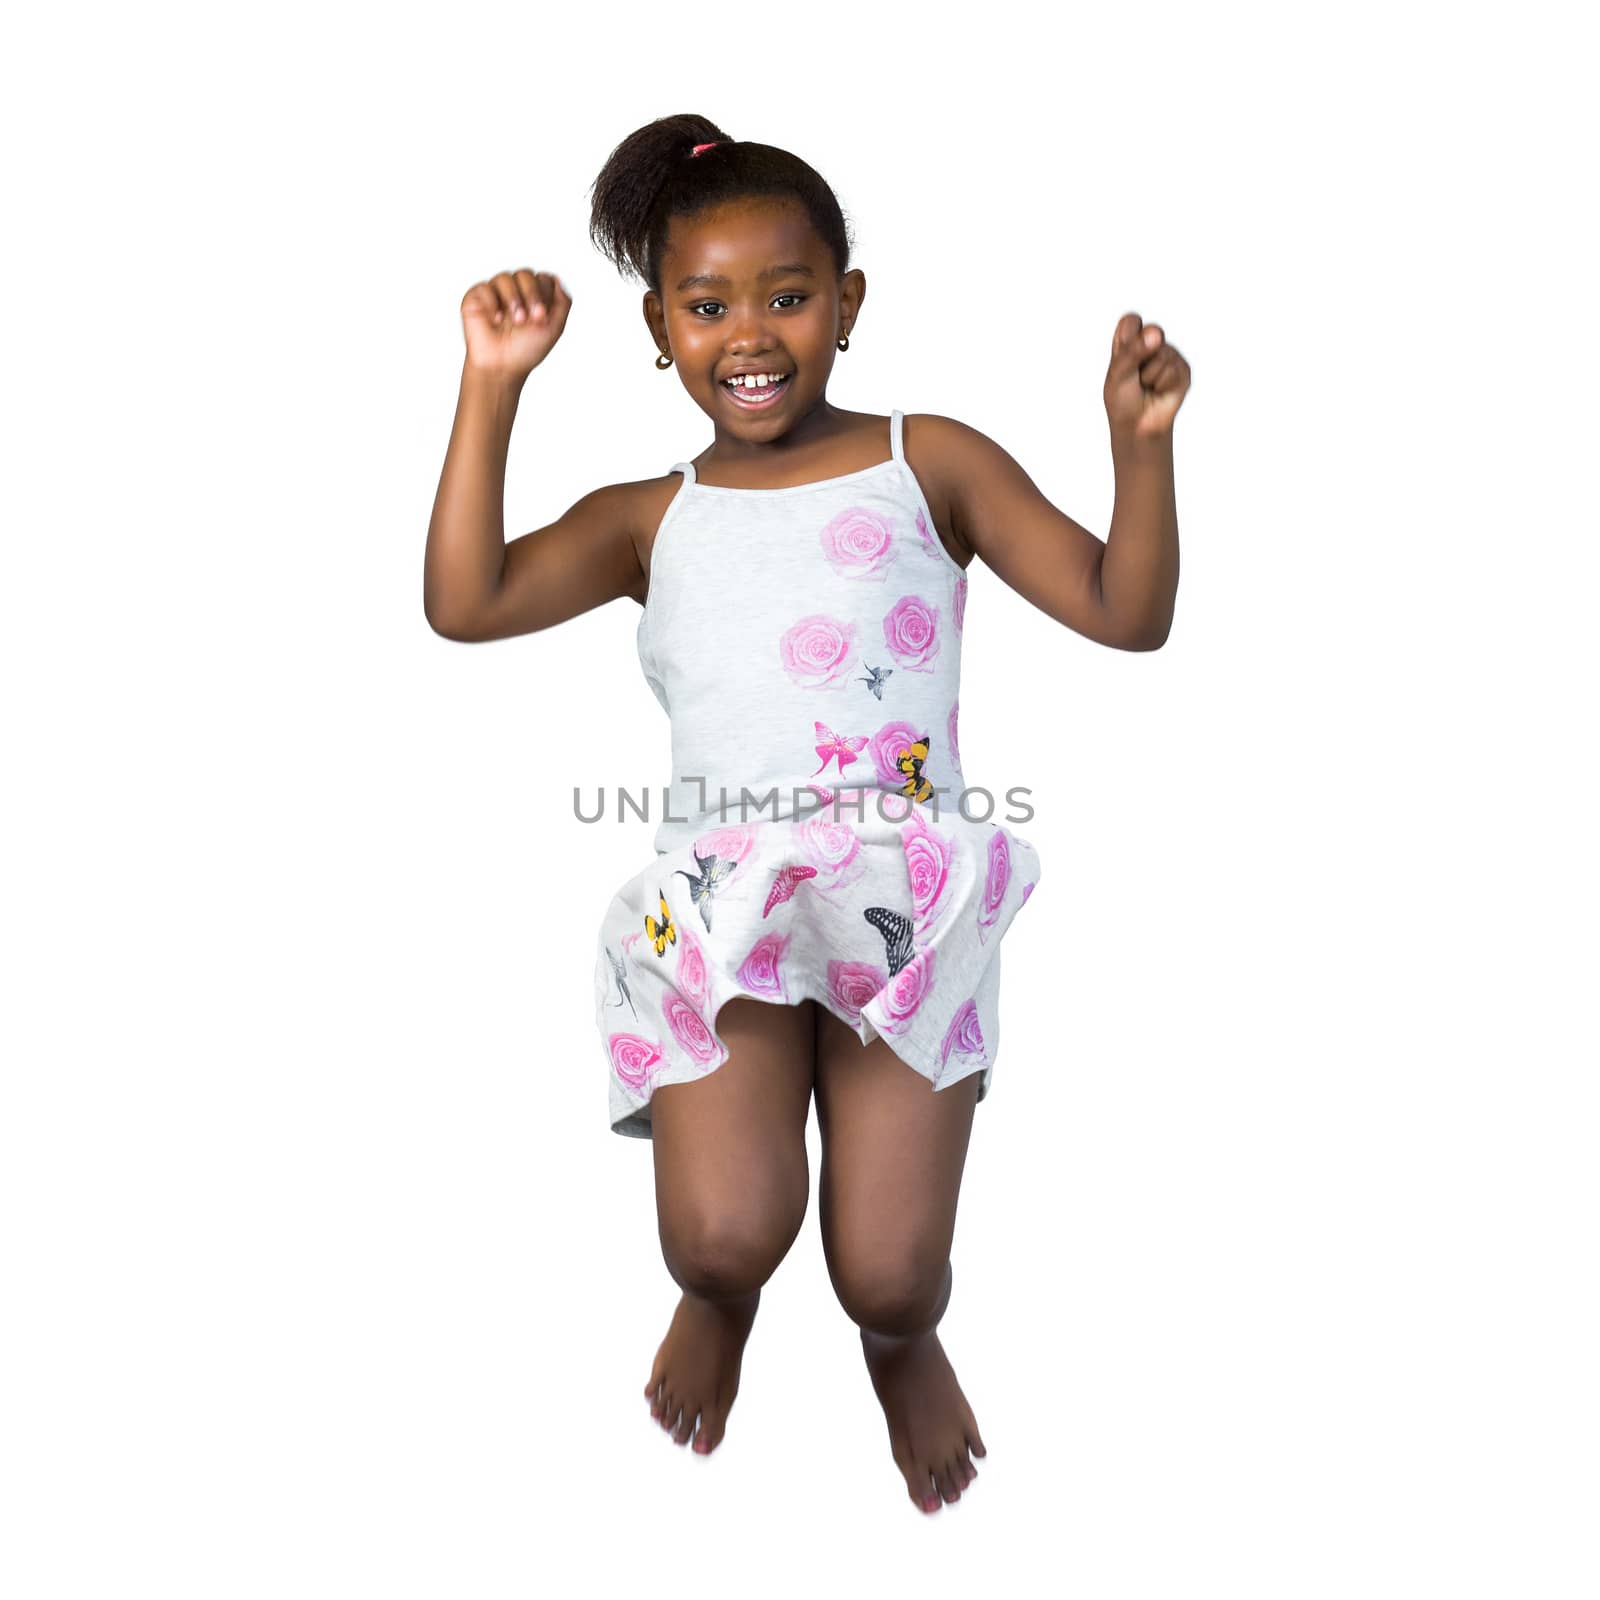 Close up portrait of happy little african girl jumping high wtih arms raised.Isolated on white background.